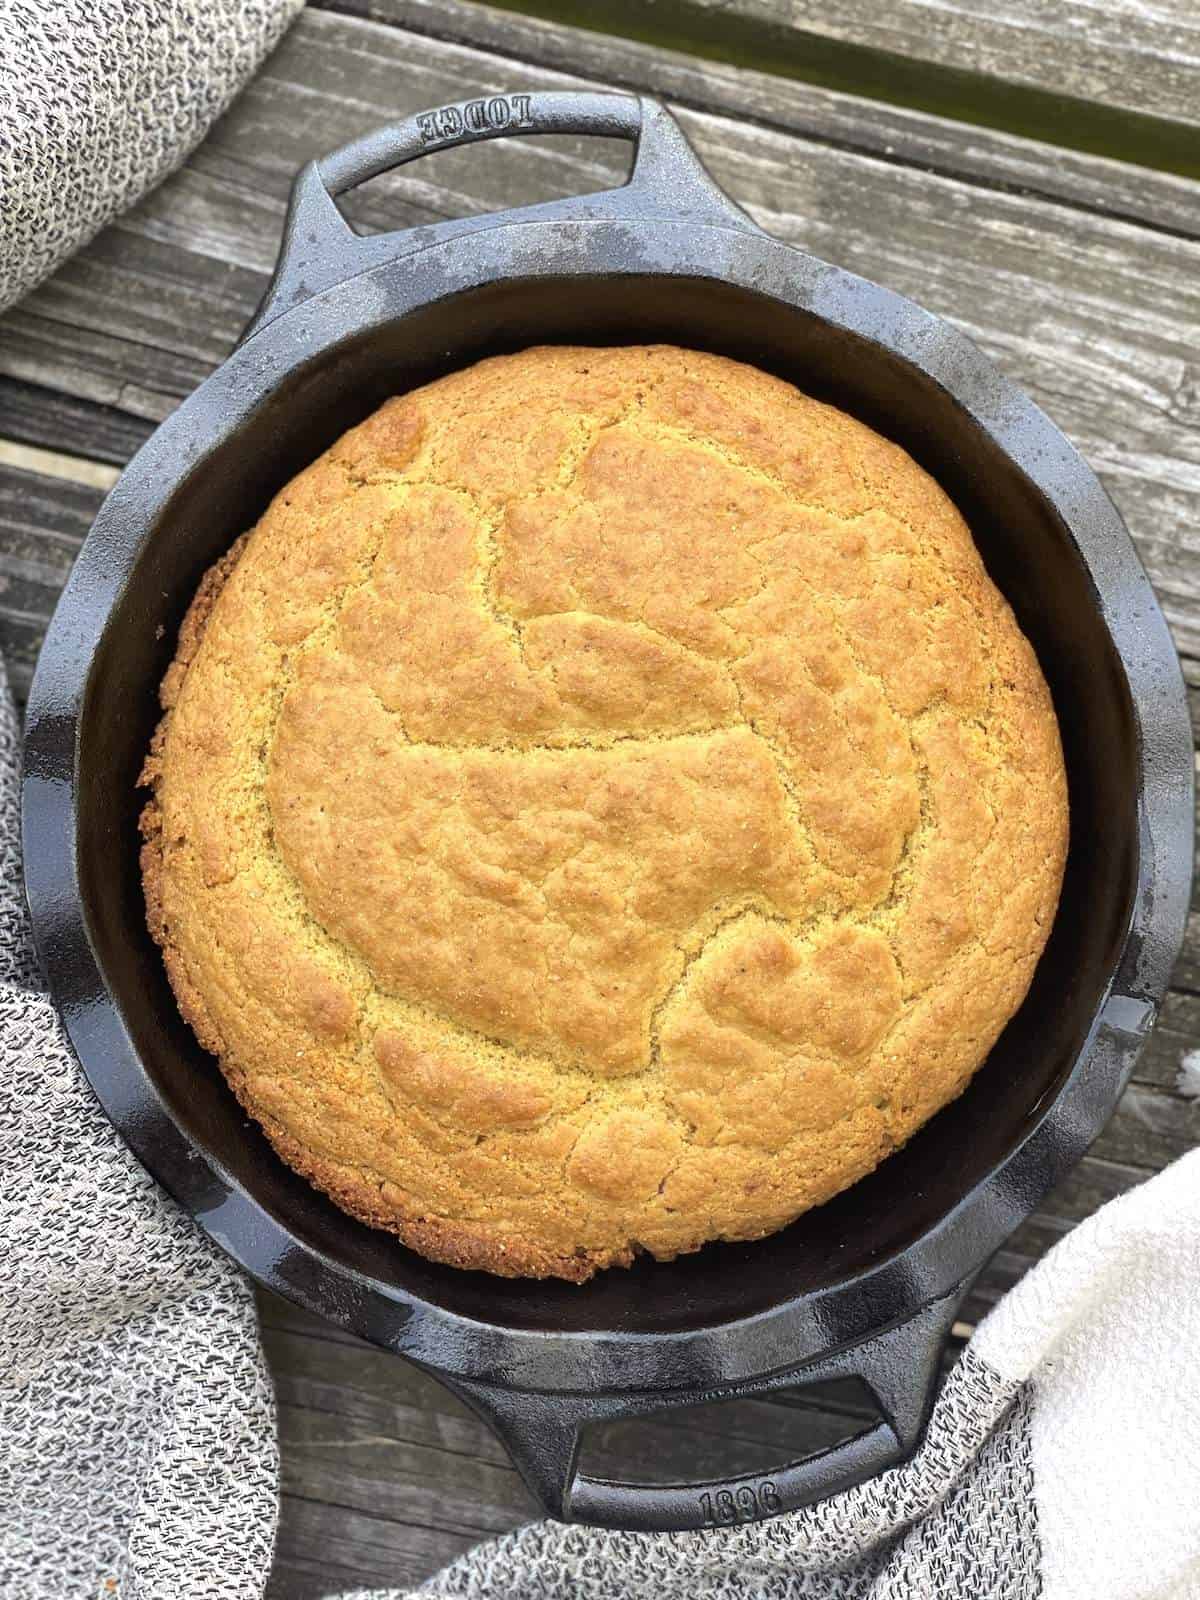 A cast iron pie pan with baked golden brown southern cornbread in it.